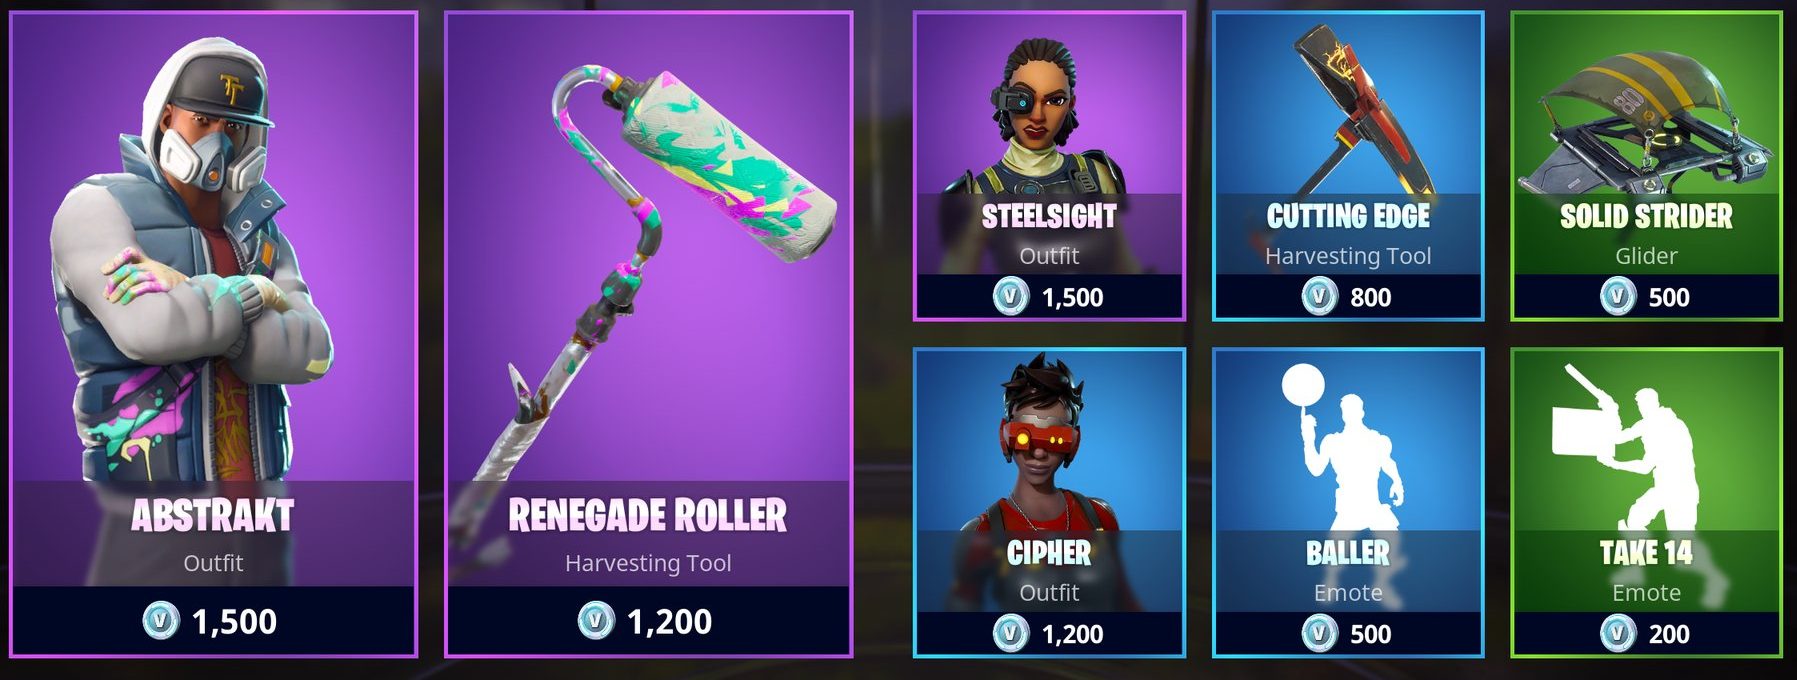 Fortnite Item Shop - Featured and Daily Items | Fortnite ... - 1797 x 680 jpeg 164kB